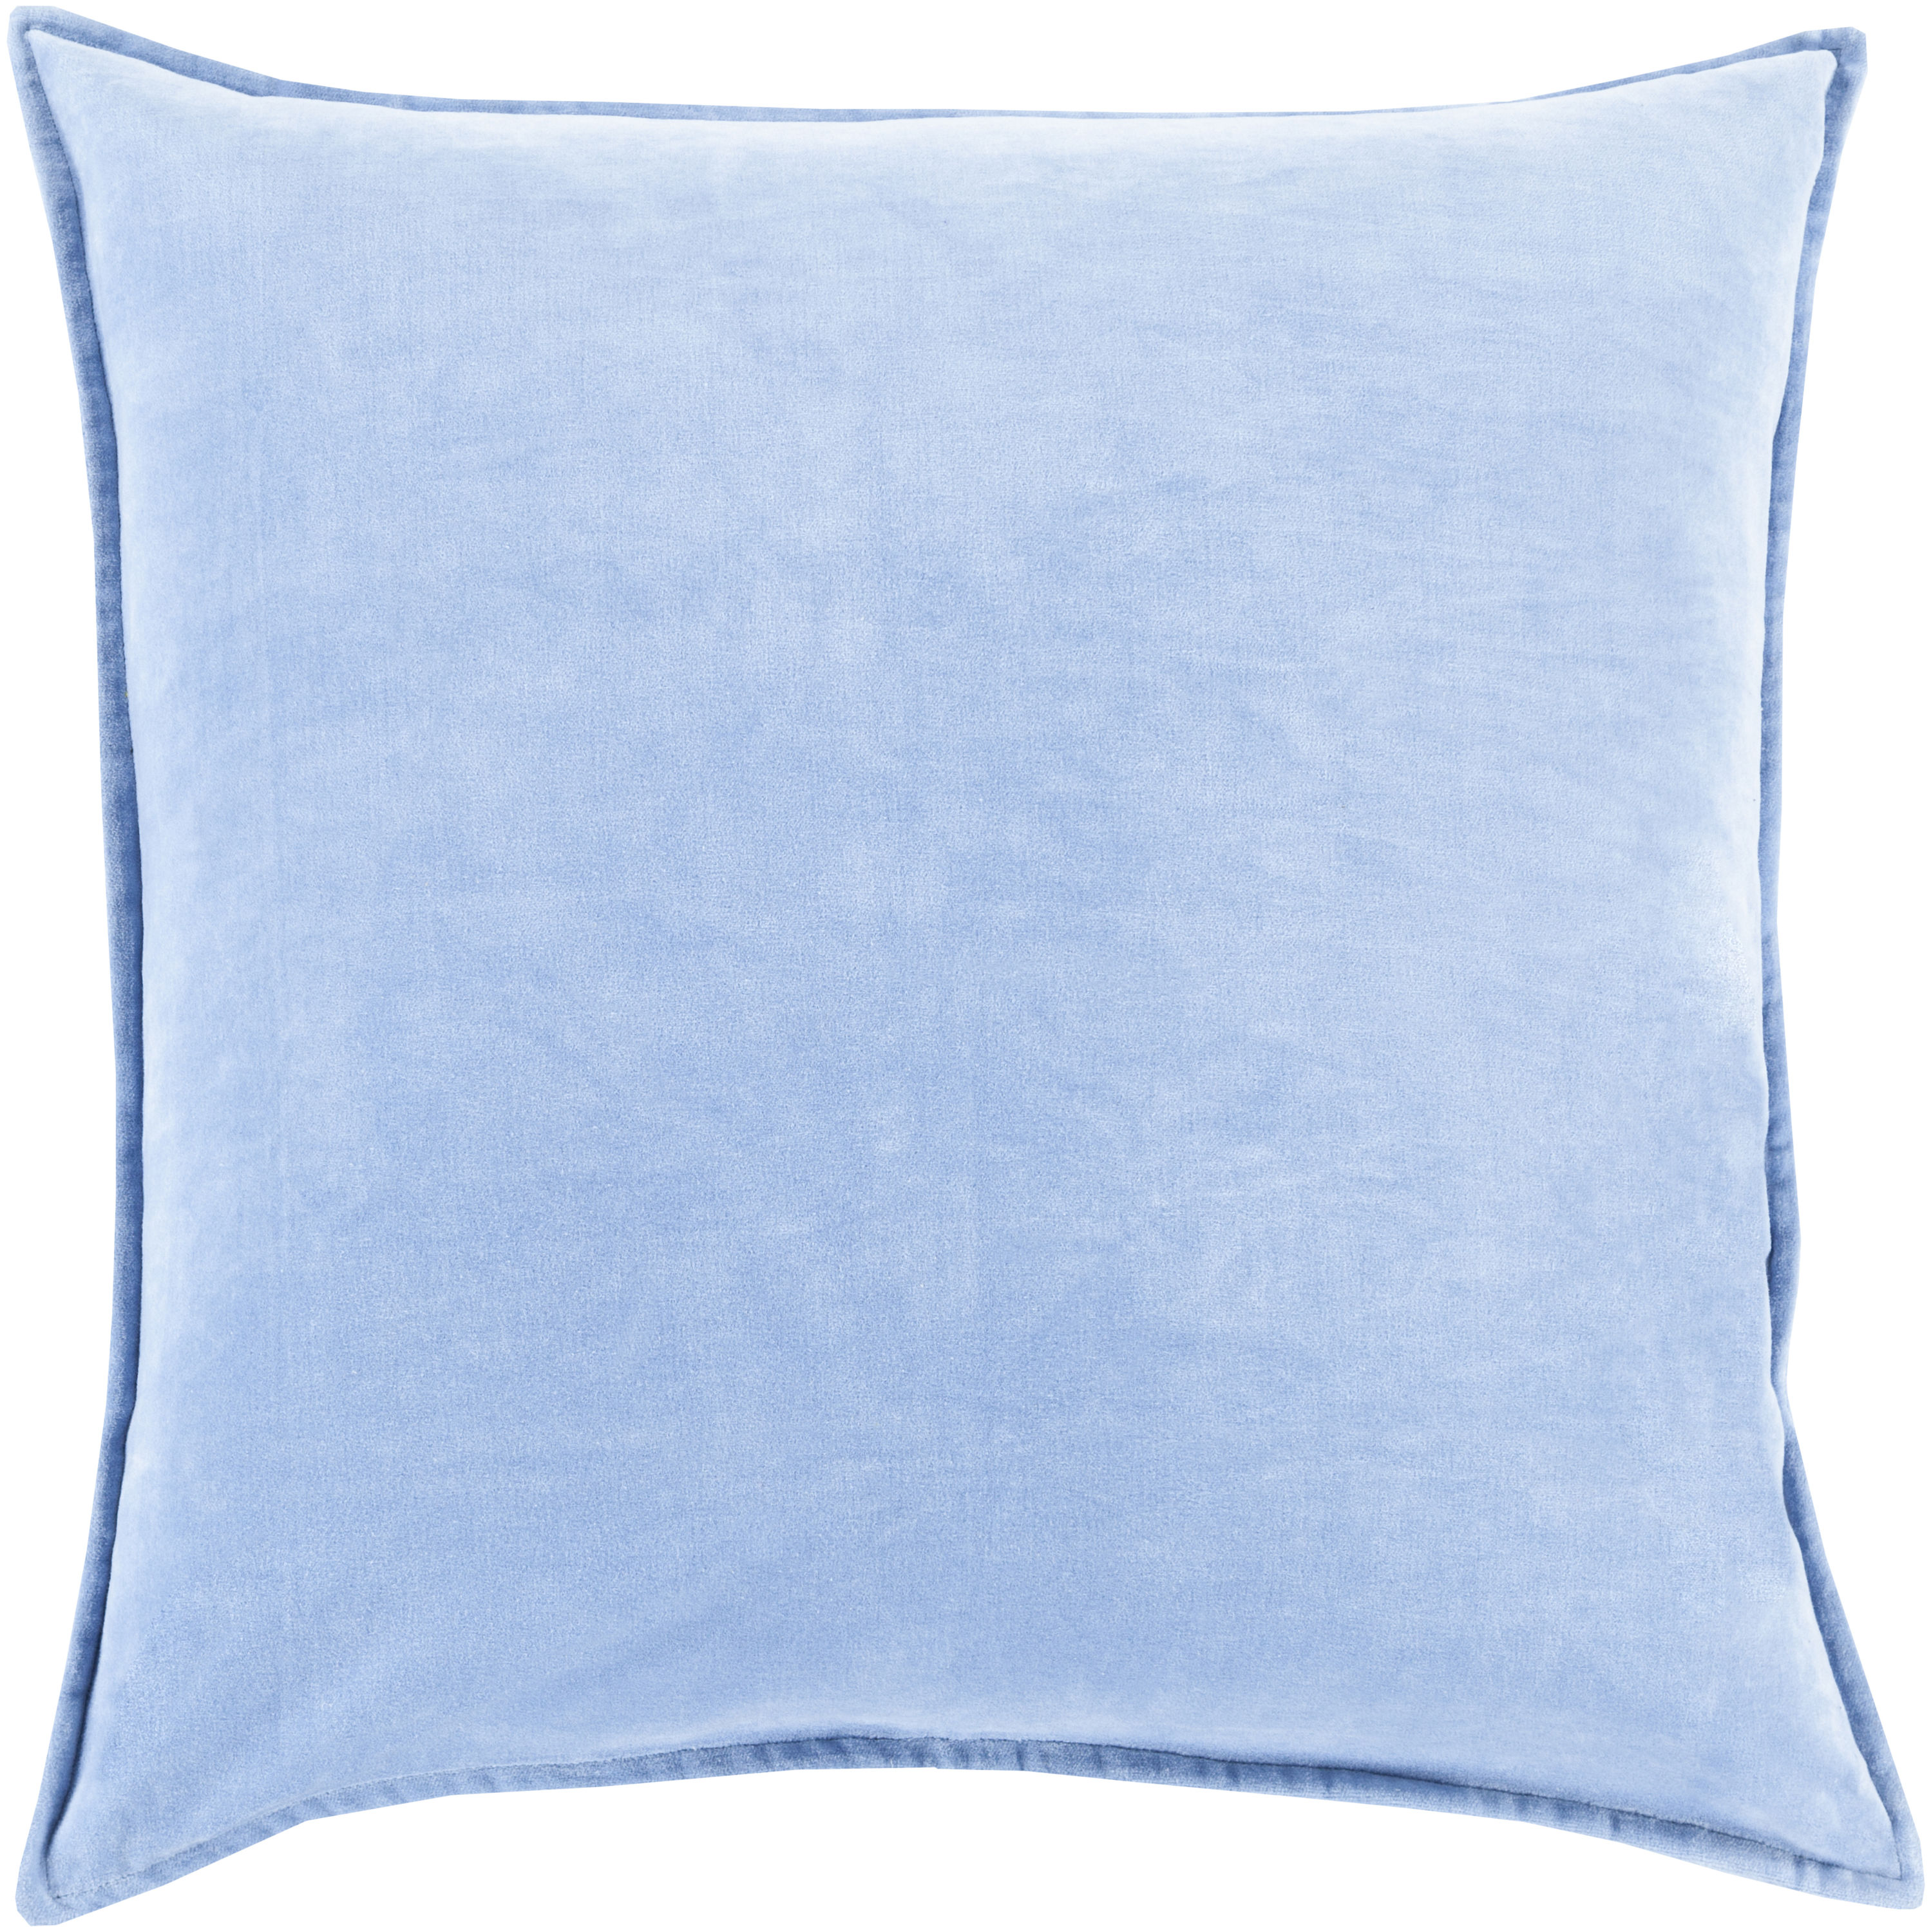 18 Inch Square Pillow by Blu Dot at